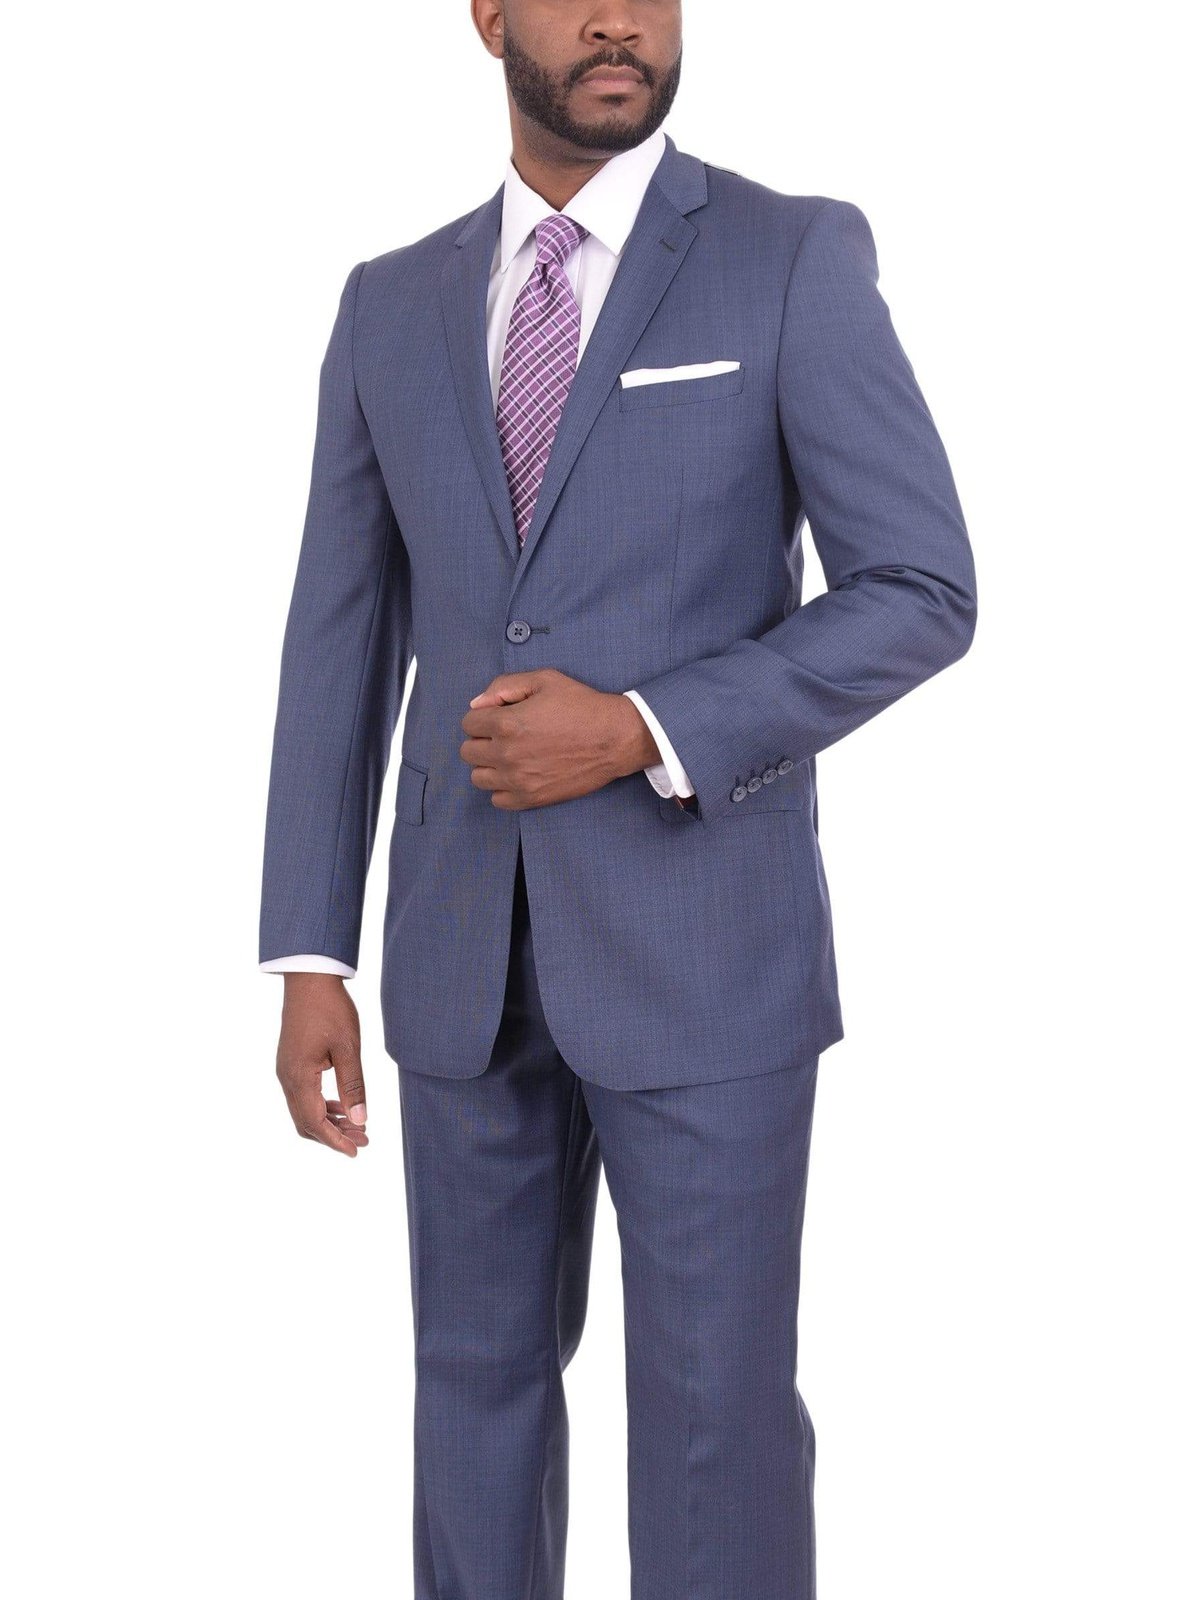 Giorgio Cosani TWO PIECE SUITS 44R Giorgio Cosani Regular Fit Heathered Blue Two Button Wool Blend Suit